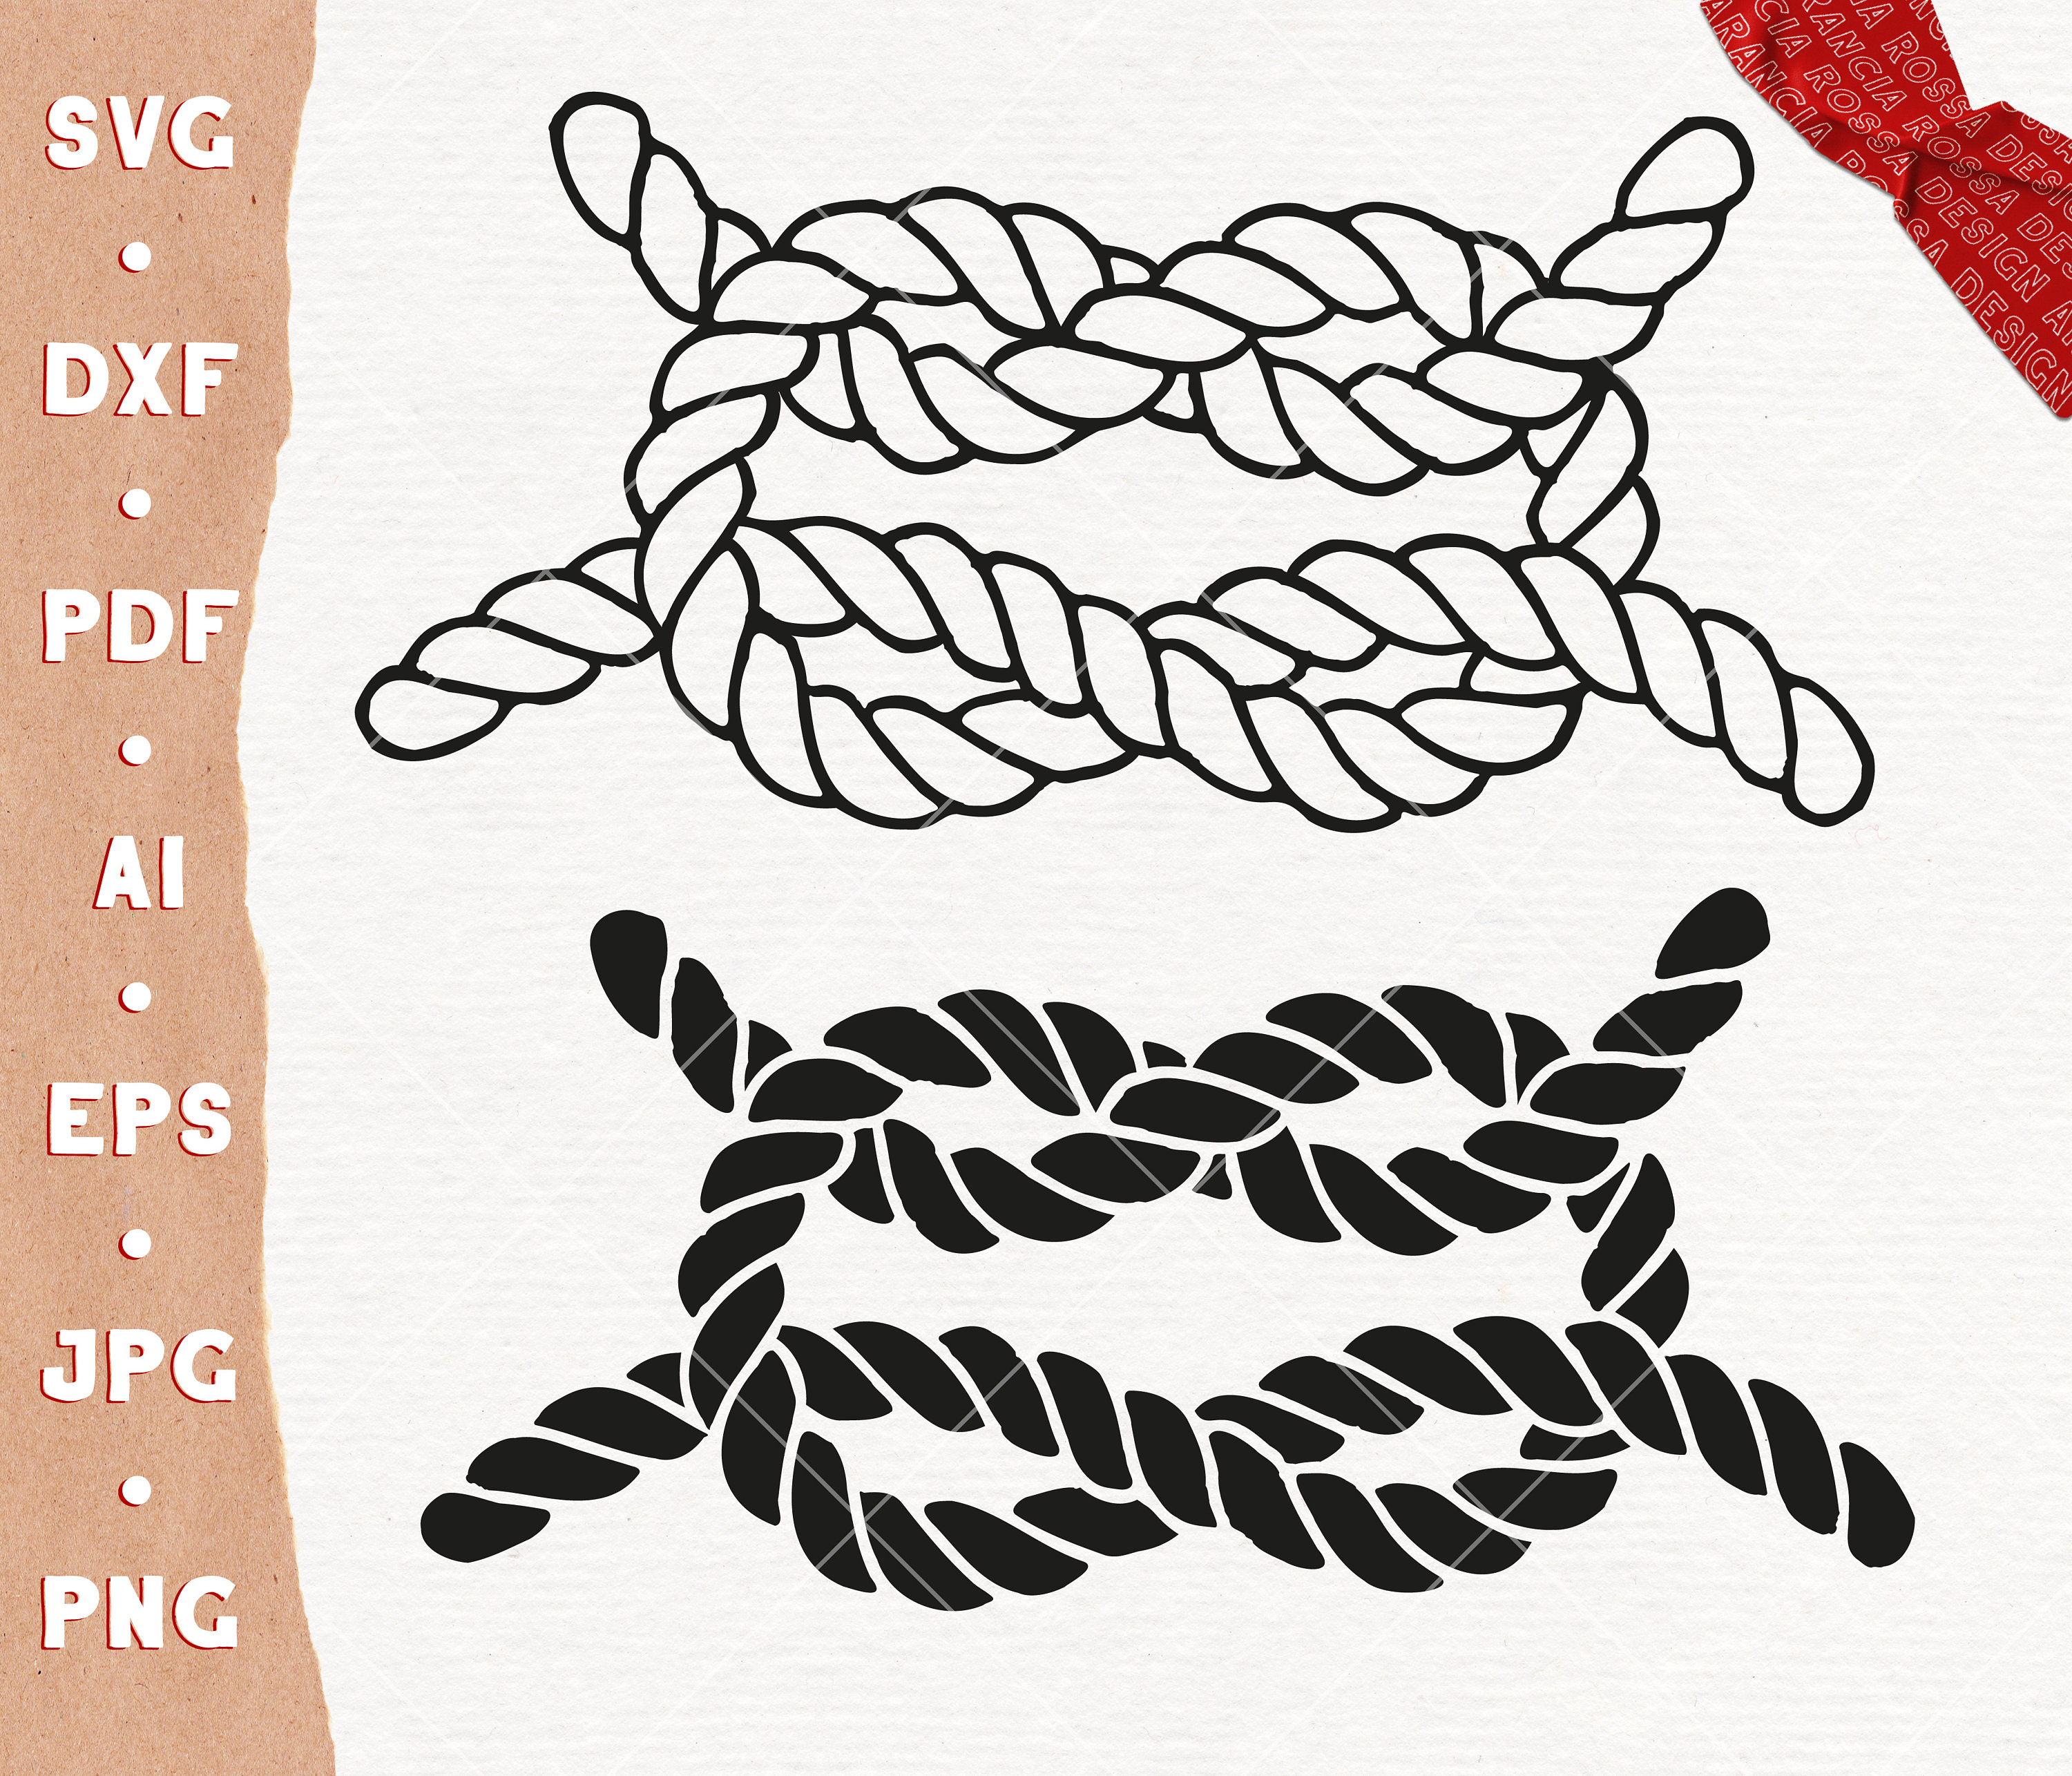 Nautical Rope Knot SVG Cut File, DXF PNG Eps, Marine Rope Knot Svg, Rope  Knot Clipart, Nautical Square Knot, Square Knot, Cricut Cut File 